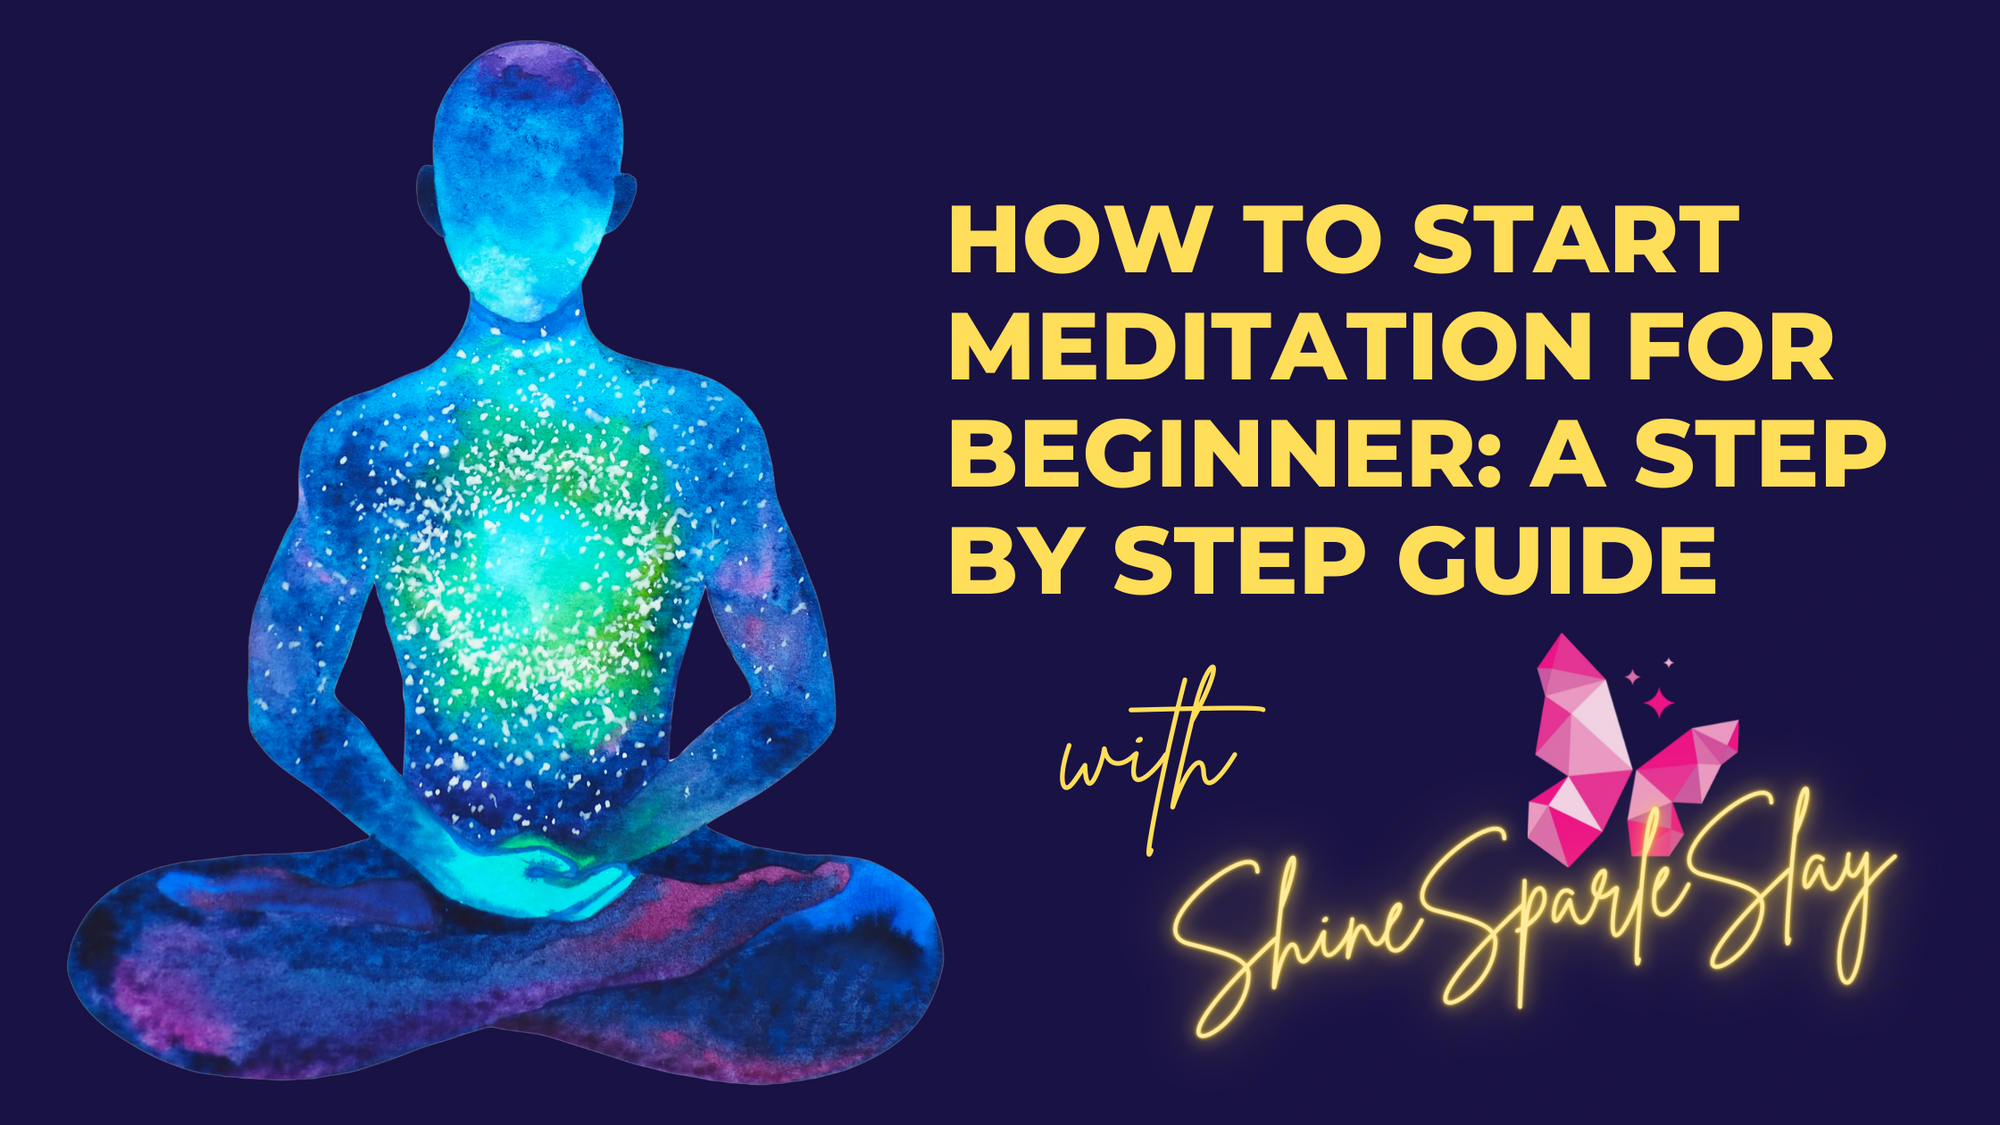 How to start meditation for beginner: A step-by-step guide